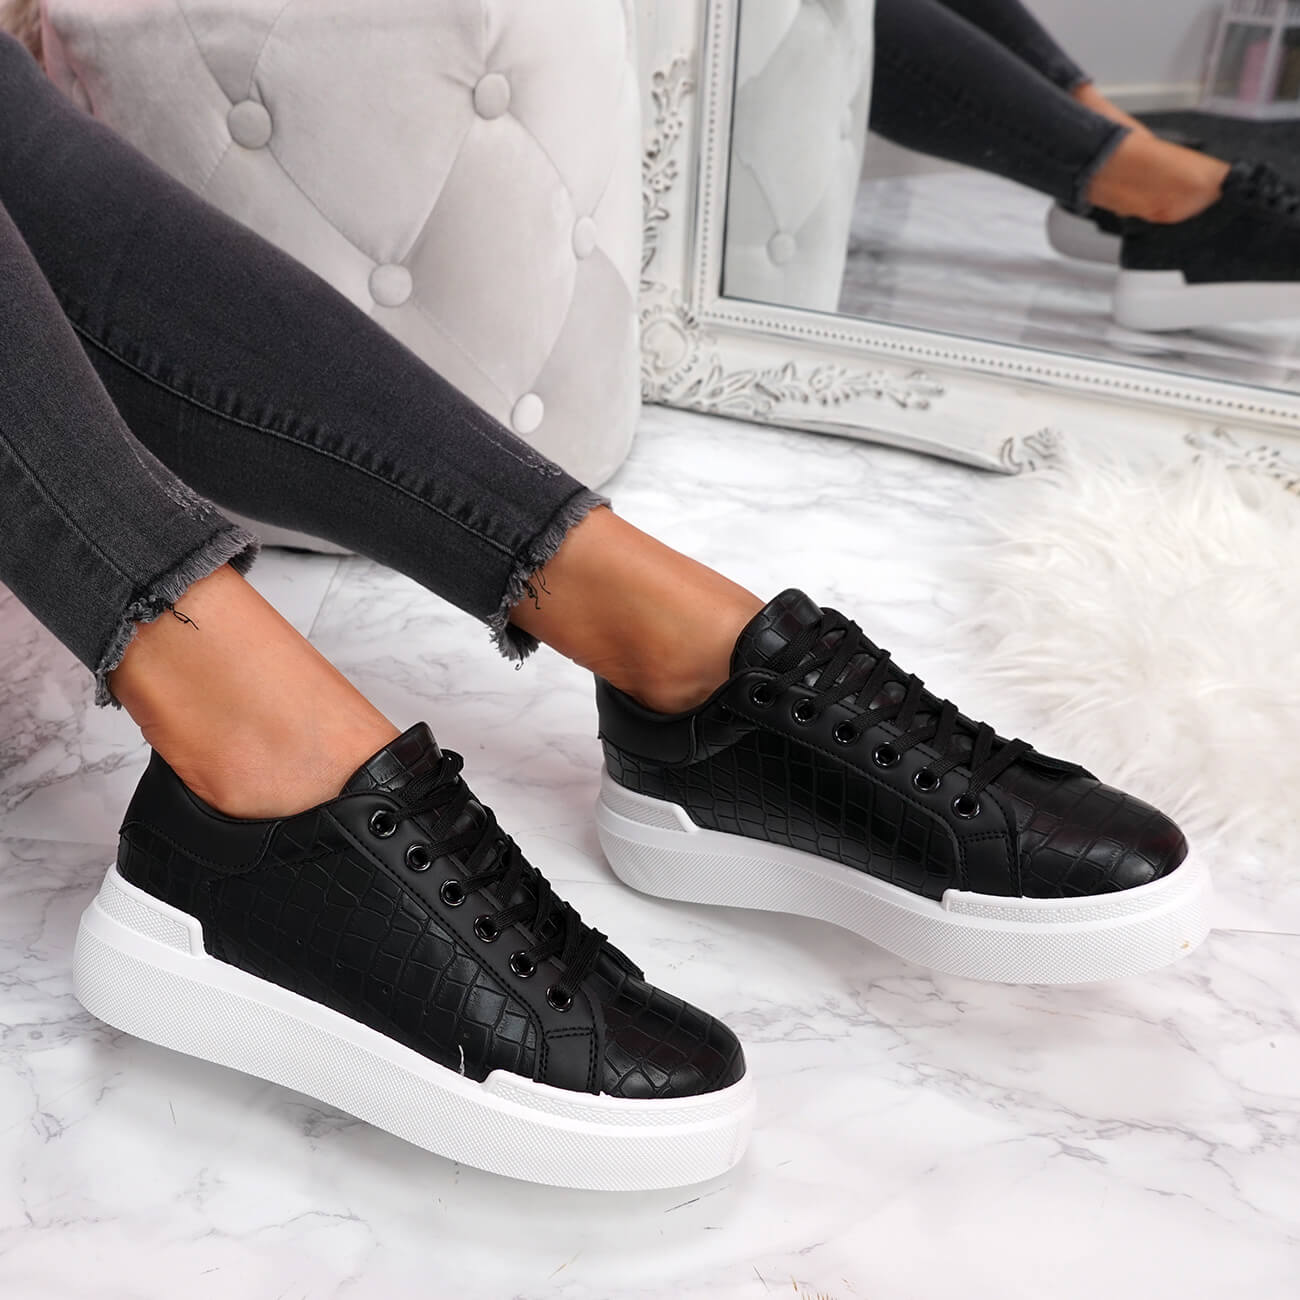 crocodile pattern lace up sneakers